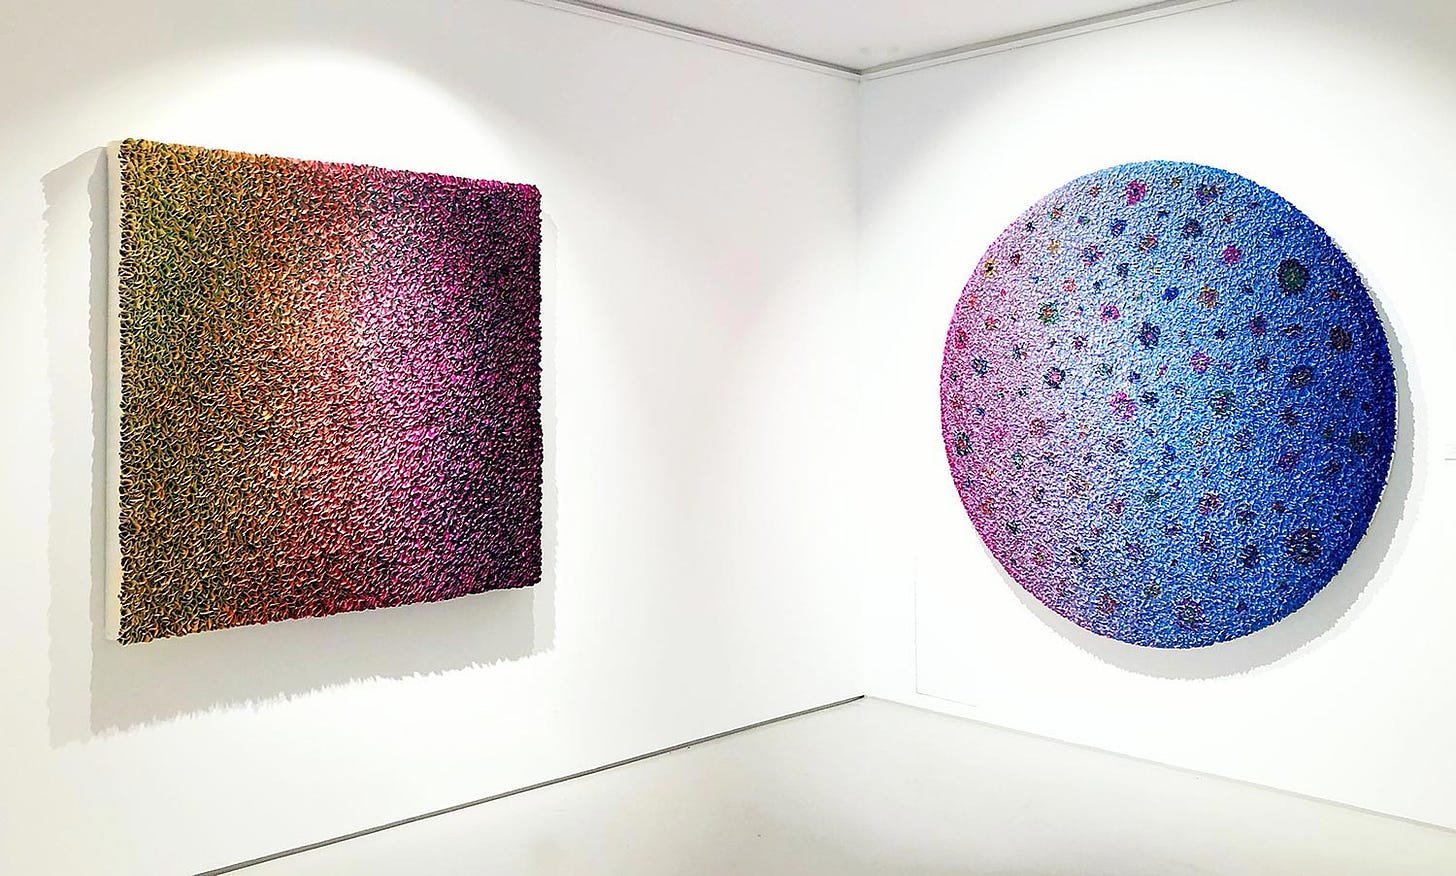 Absolute Art Gallery : Zhuang Hong Yi "Infinite Flowers" solo show in  Knokke (both galleries)